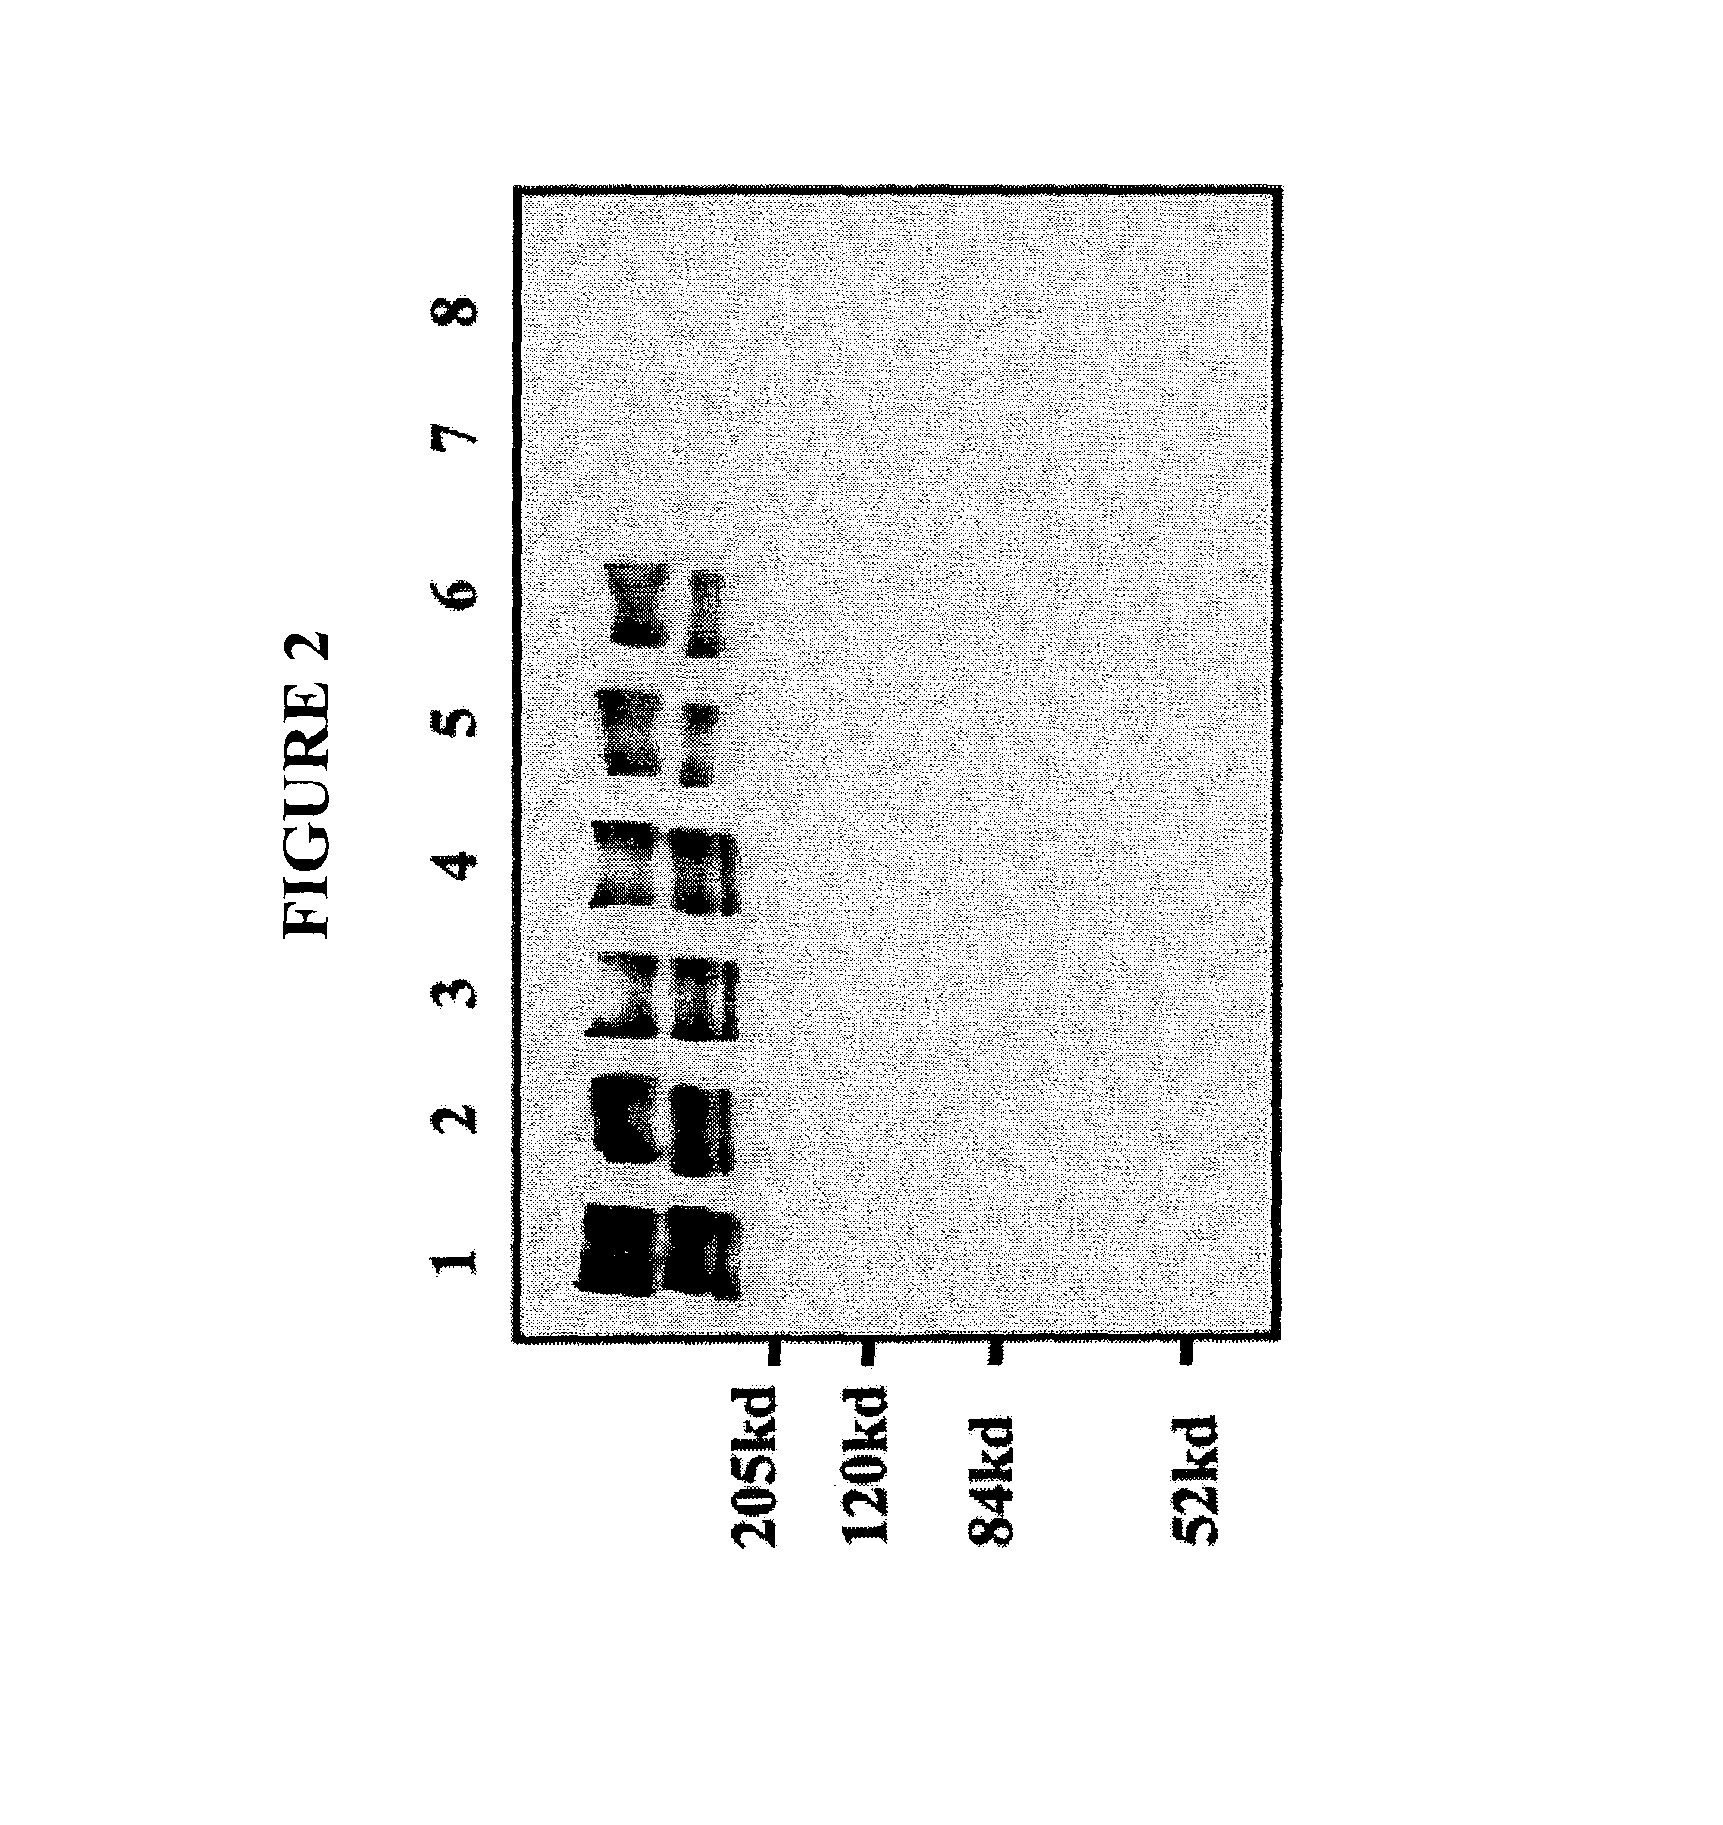 Methods and pharmaceuticals compositions for treating coronary artery disease, ischemia,and vascular disease using angiopoietins